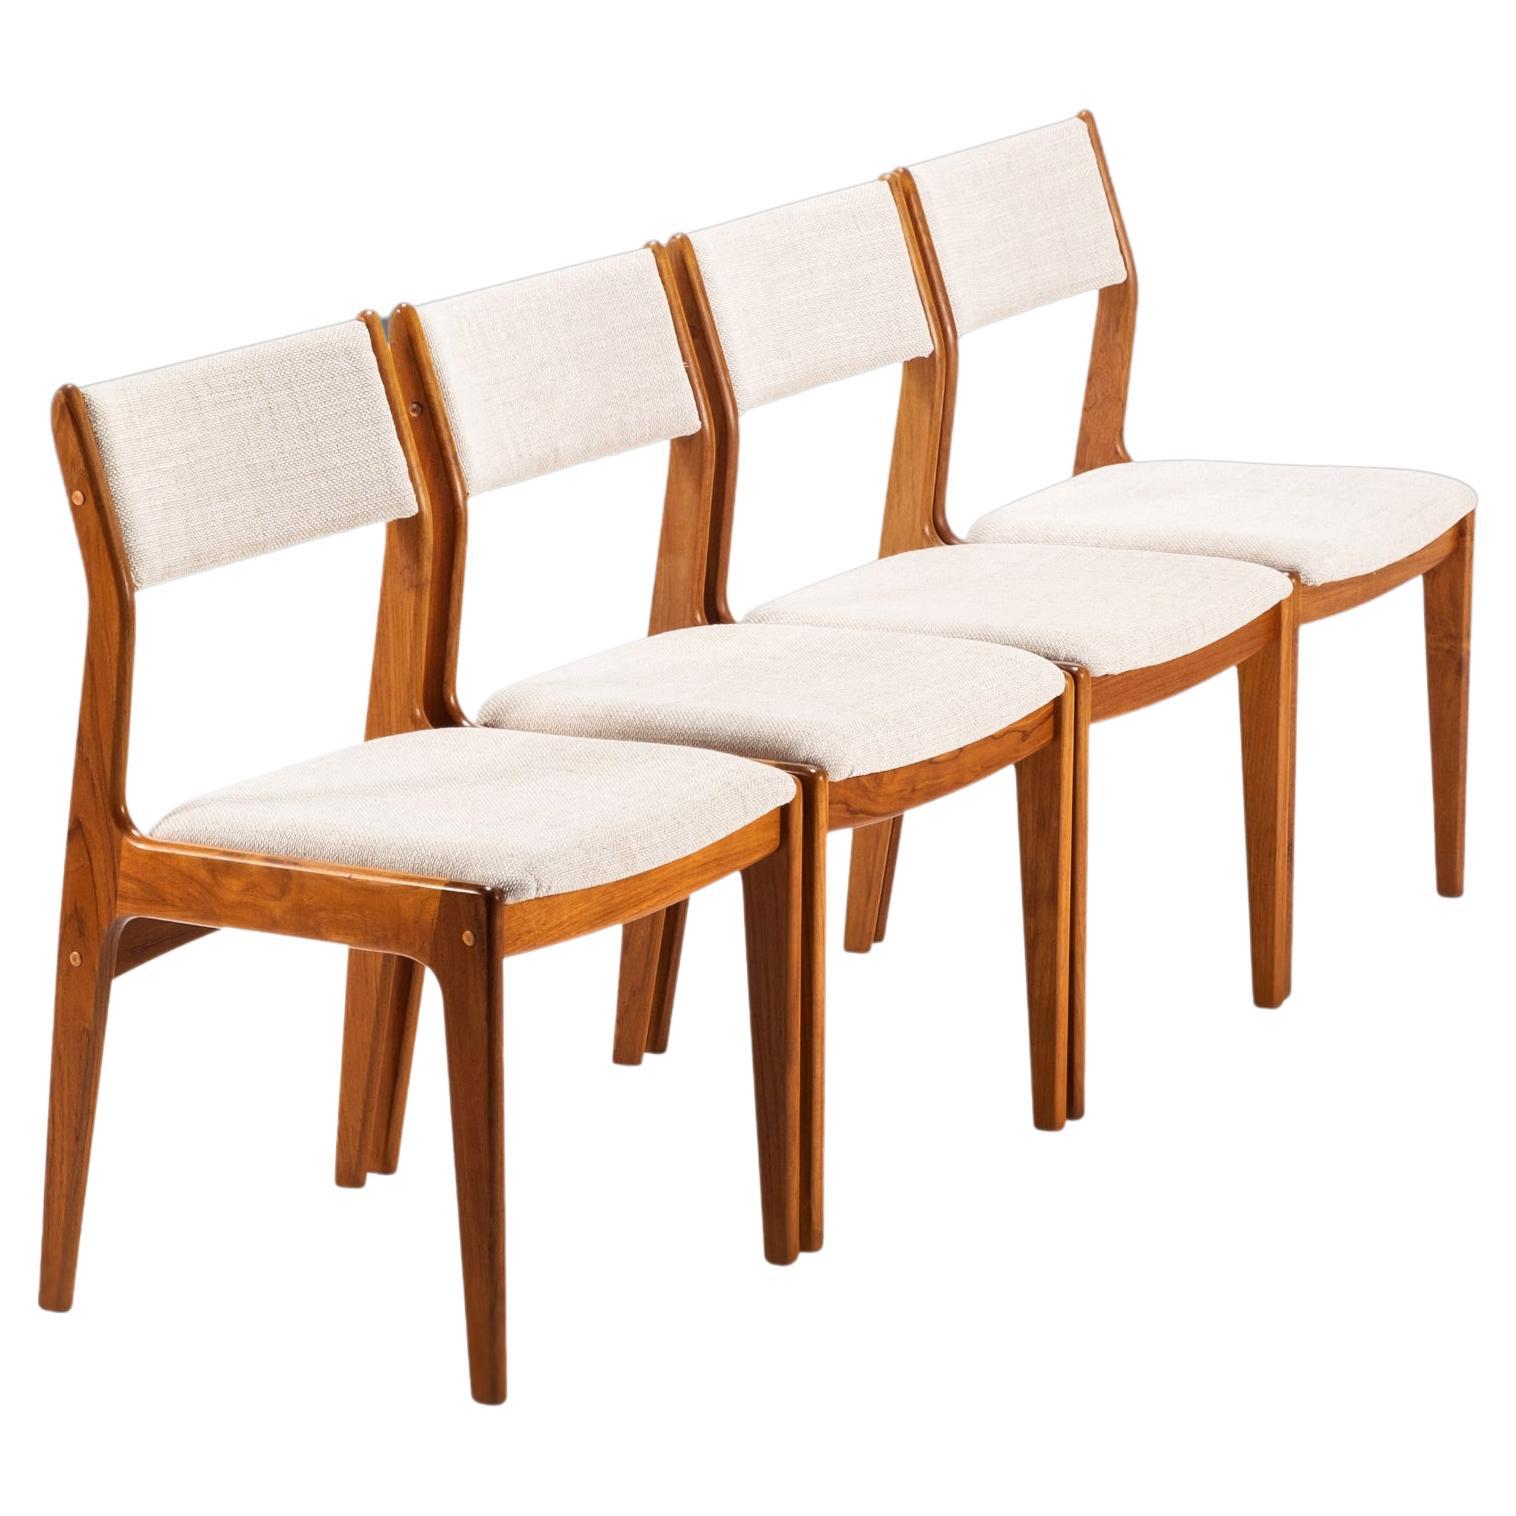 Set of Four '4' Scandinavian Styled Teak Dining Chairs w/ Oatmeal Fabric 